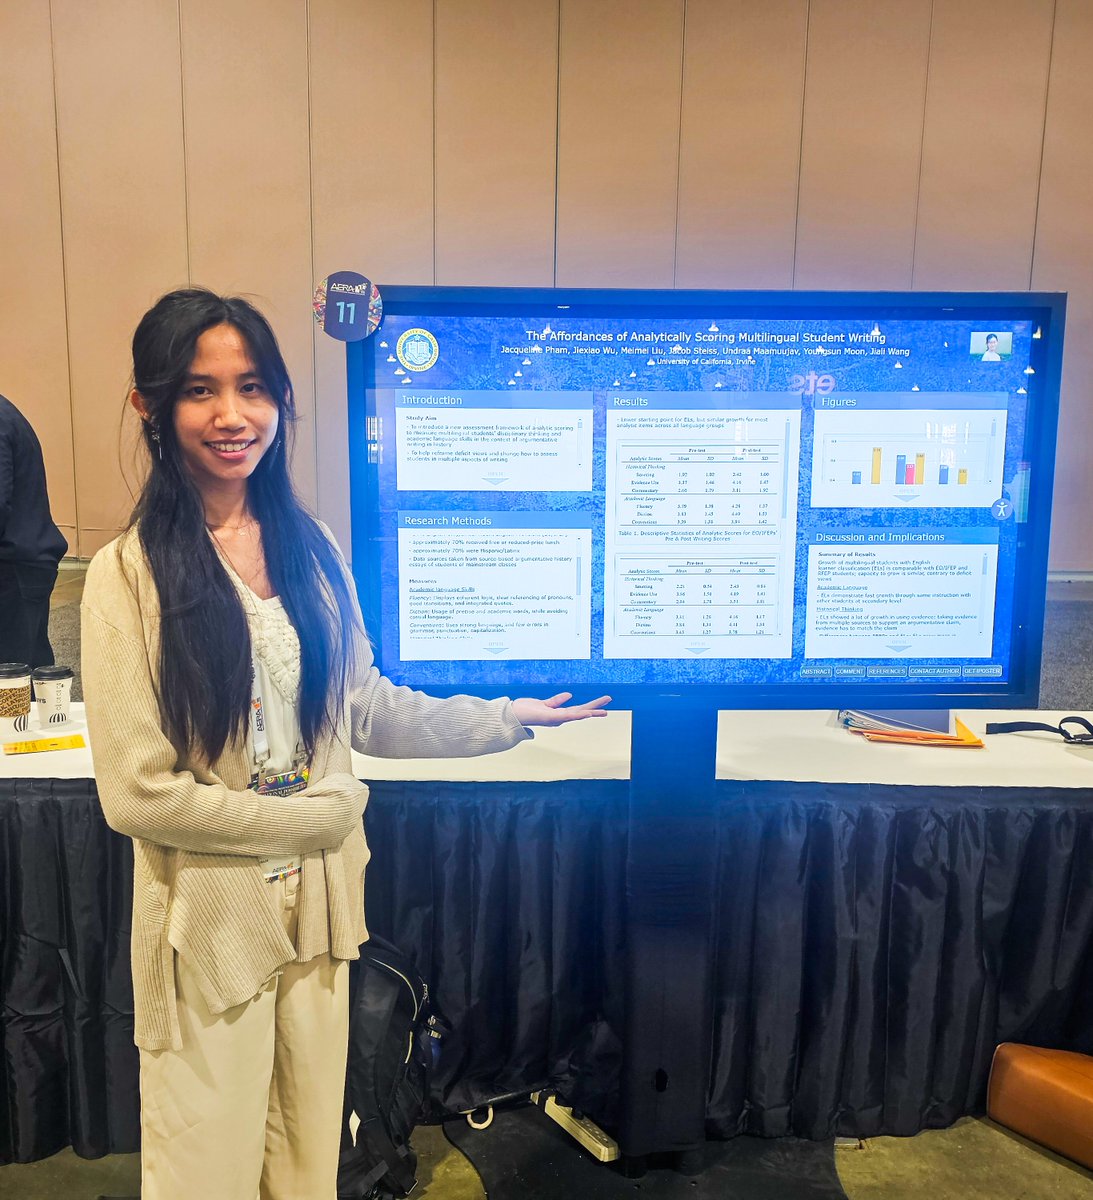 Congrats to #UCIEducation undergraduate researcher Jacqueline Pham for receiving an AERA undergraduate research fellowship! Her presentation on multilingual student writing at #AERA2024 showcases her dedication to advancing education research. Read ⬇️ education.uci.edu/aera-2024-reco…